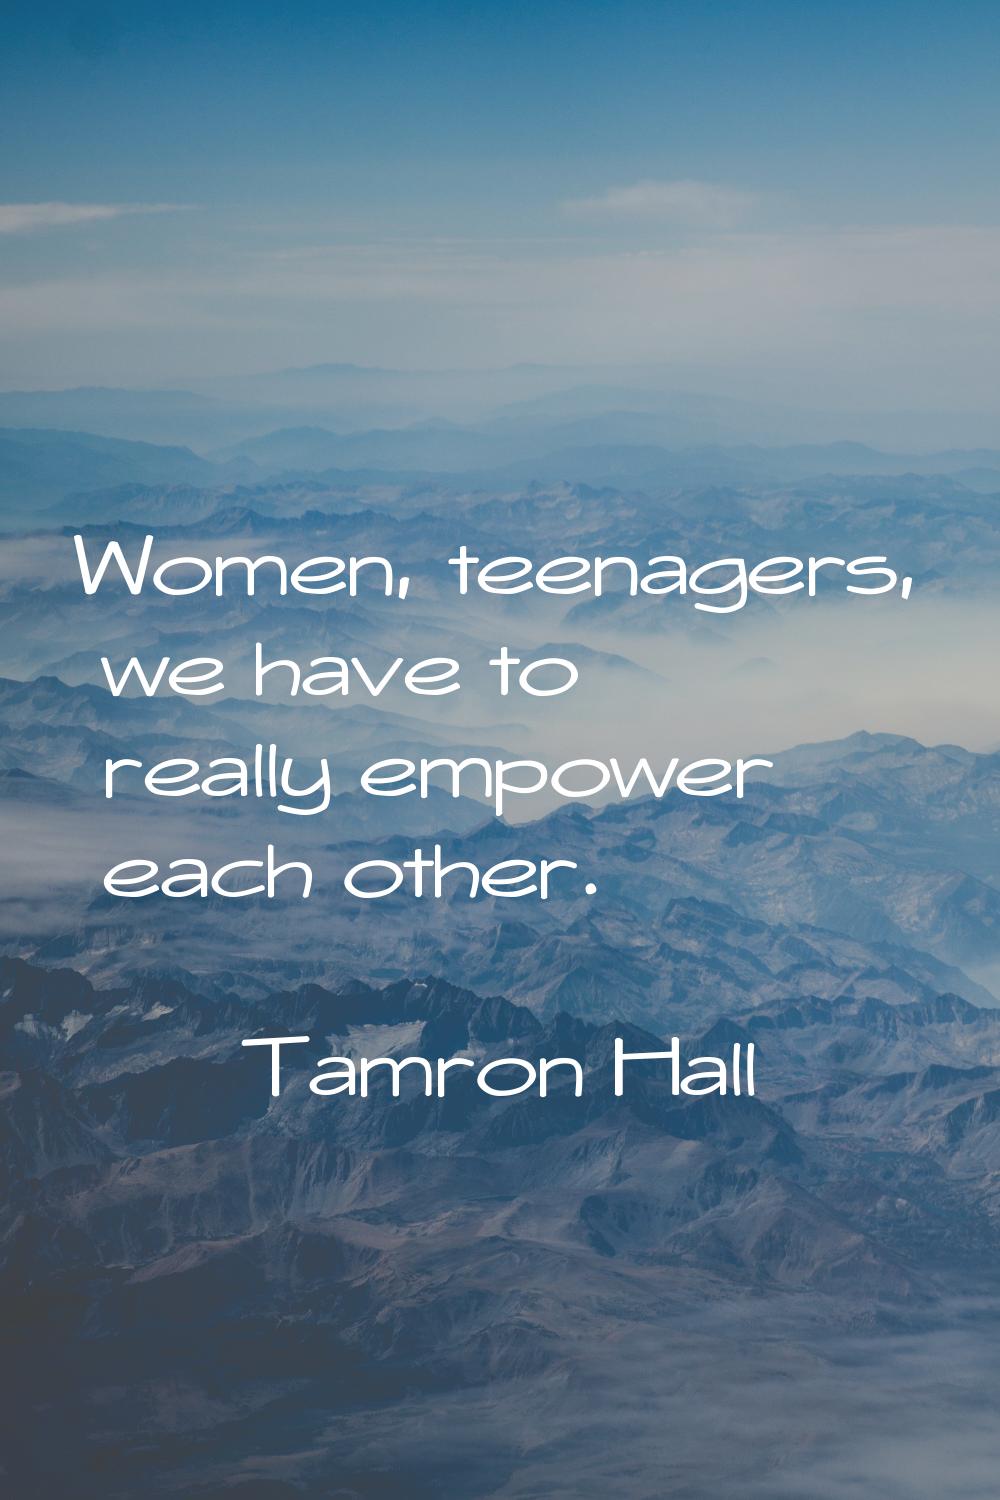 Women, teenagers, we have to really empower each other.